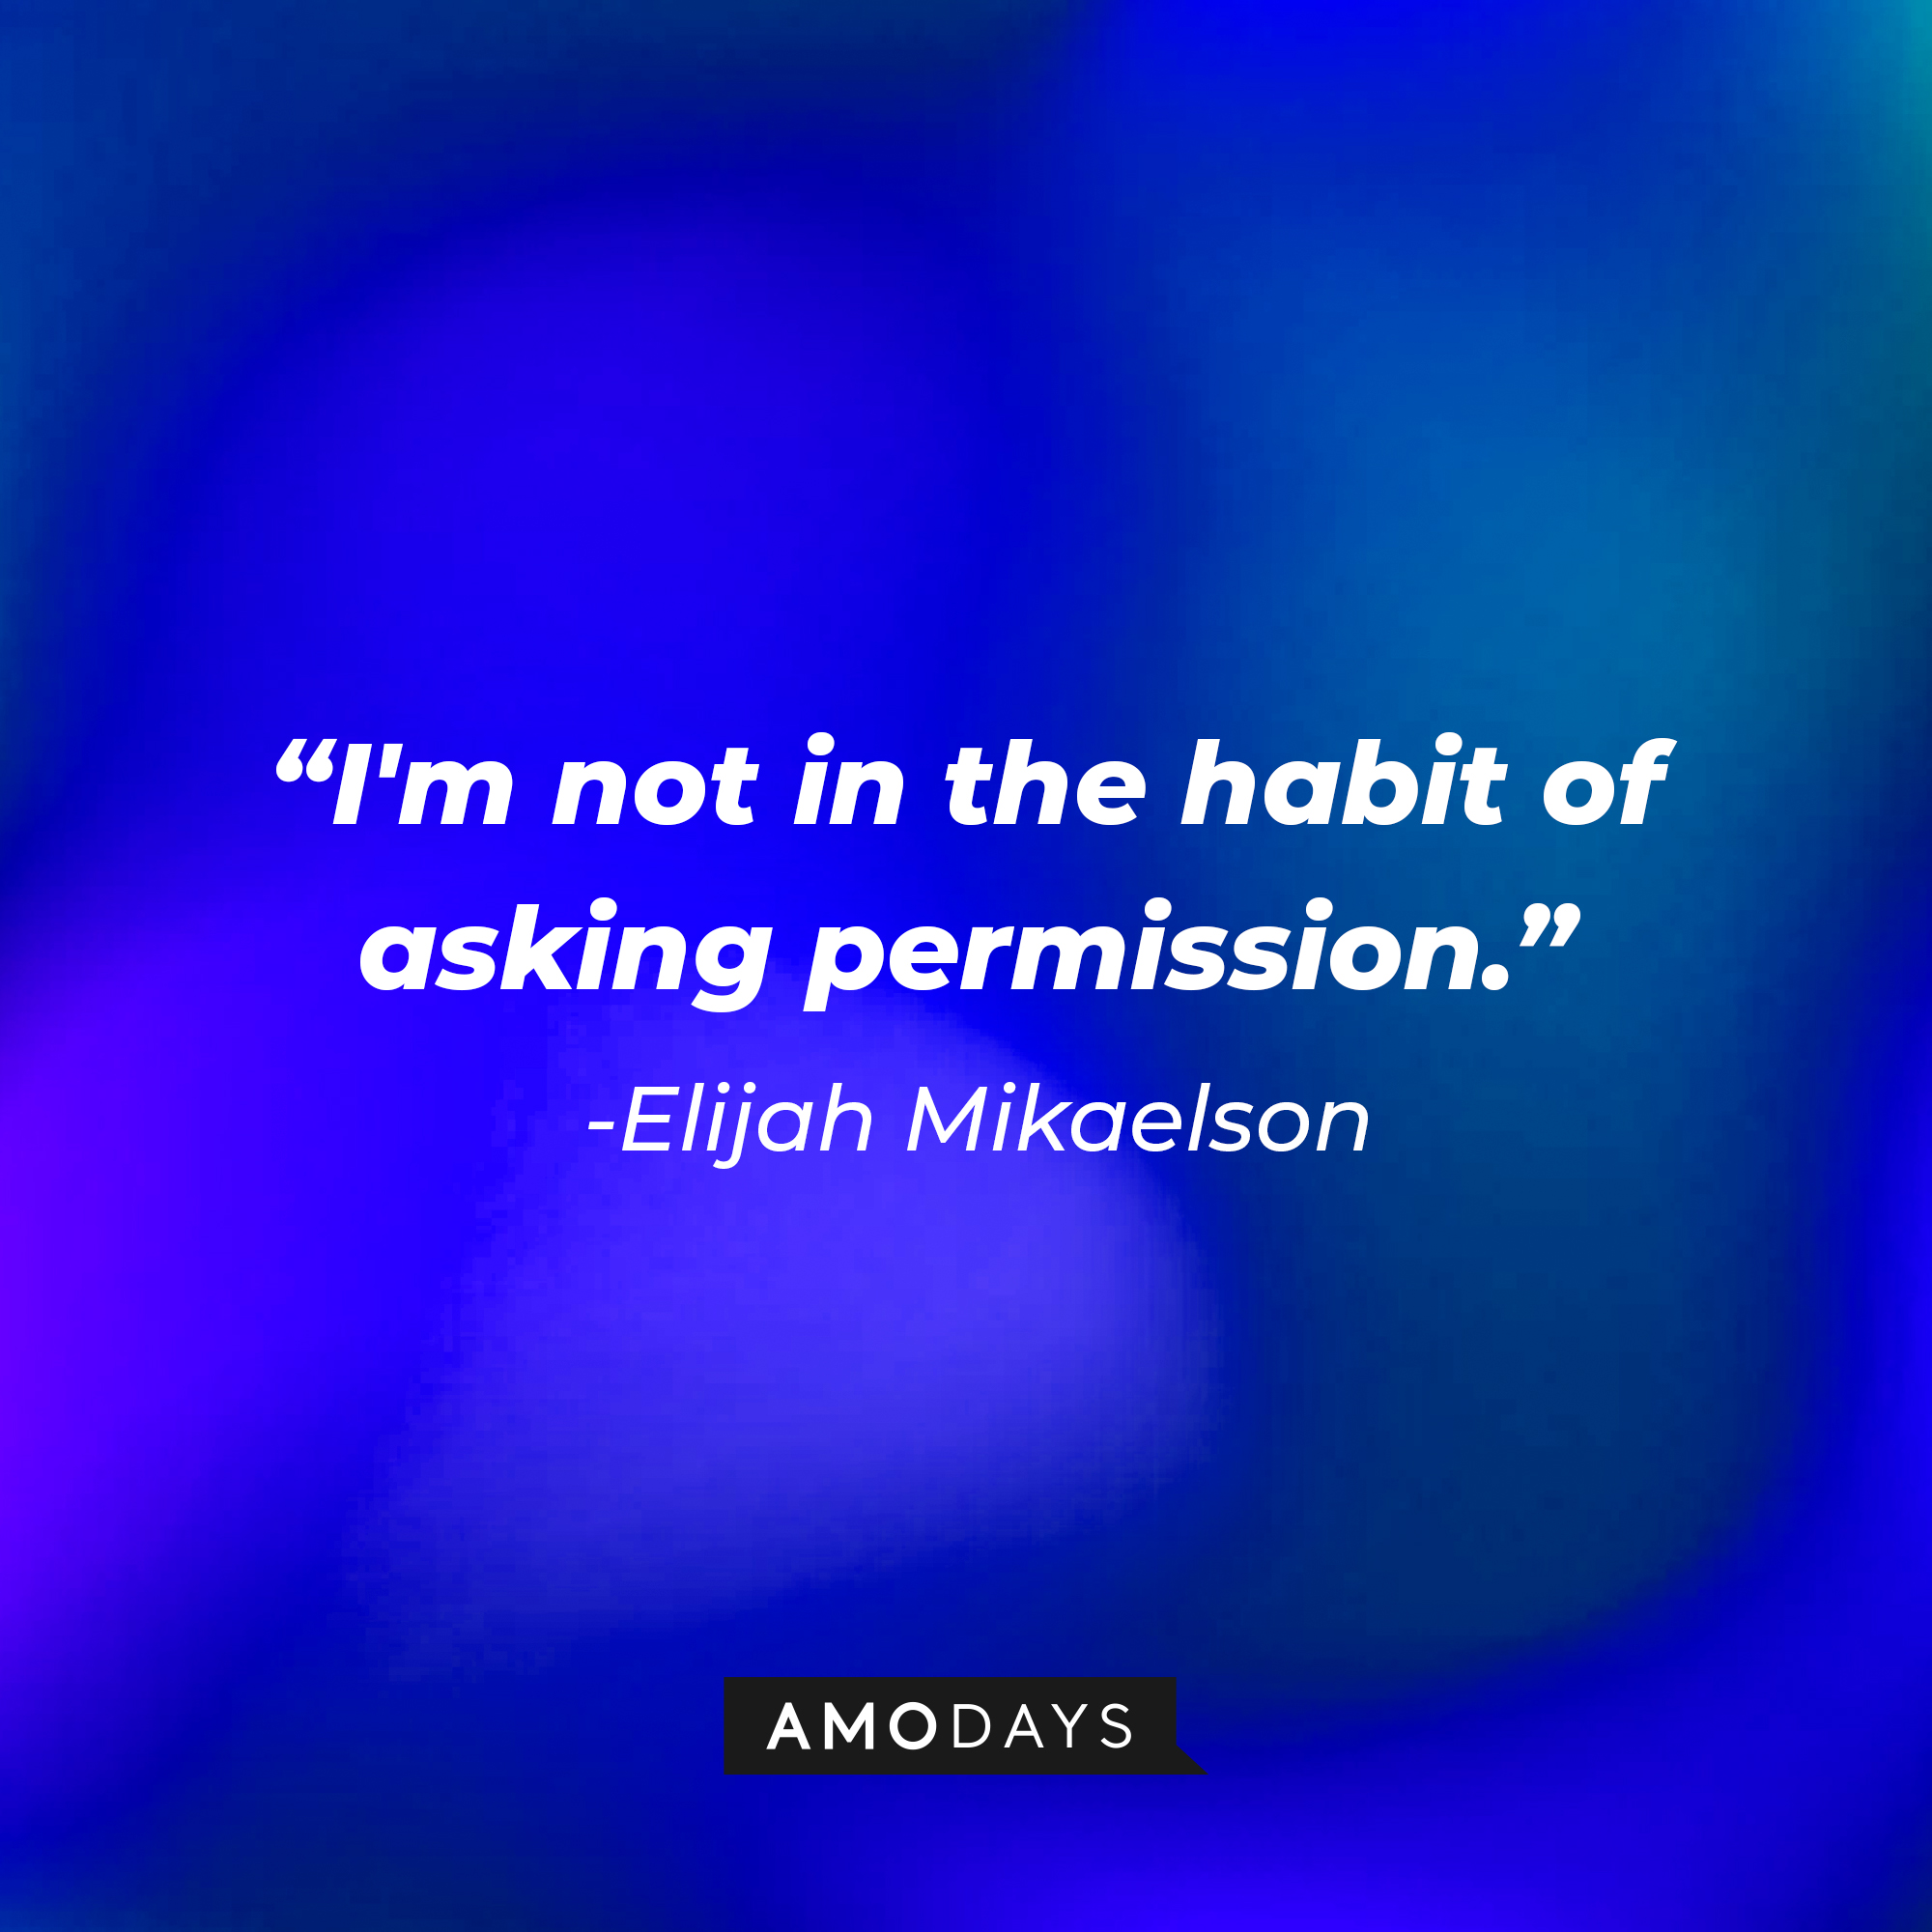 Elijah Mikaelson's quote: "I'm not in the habit of asking permission." | Source: facebook.com/thevampirediaries